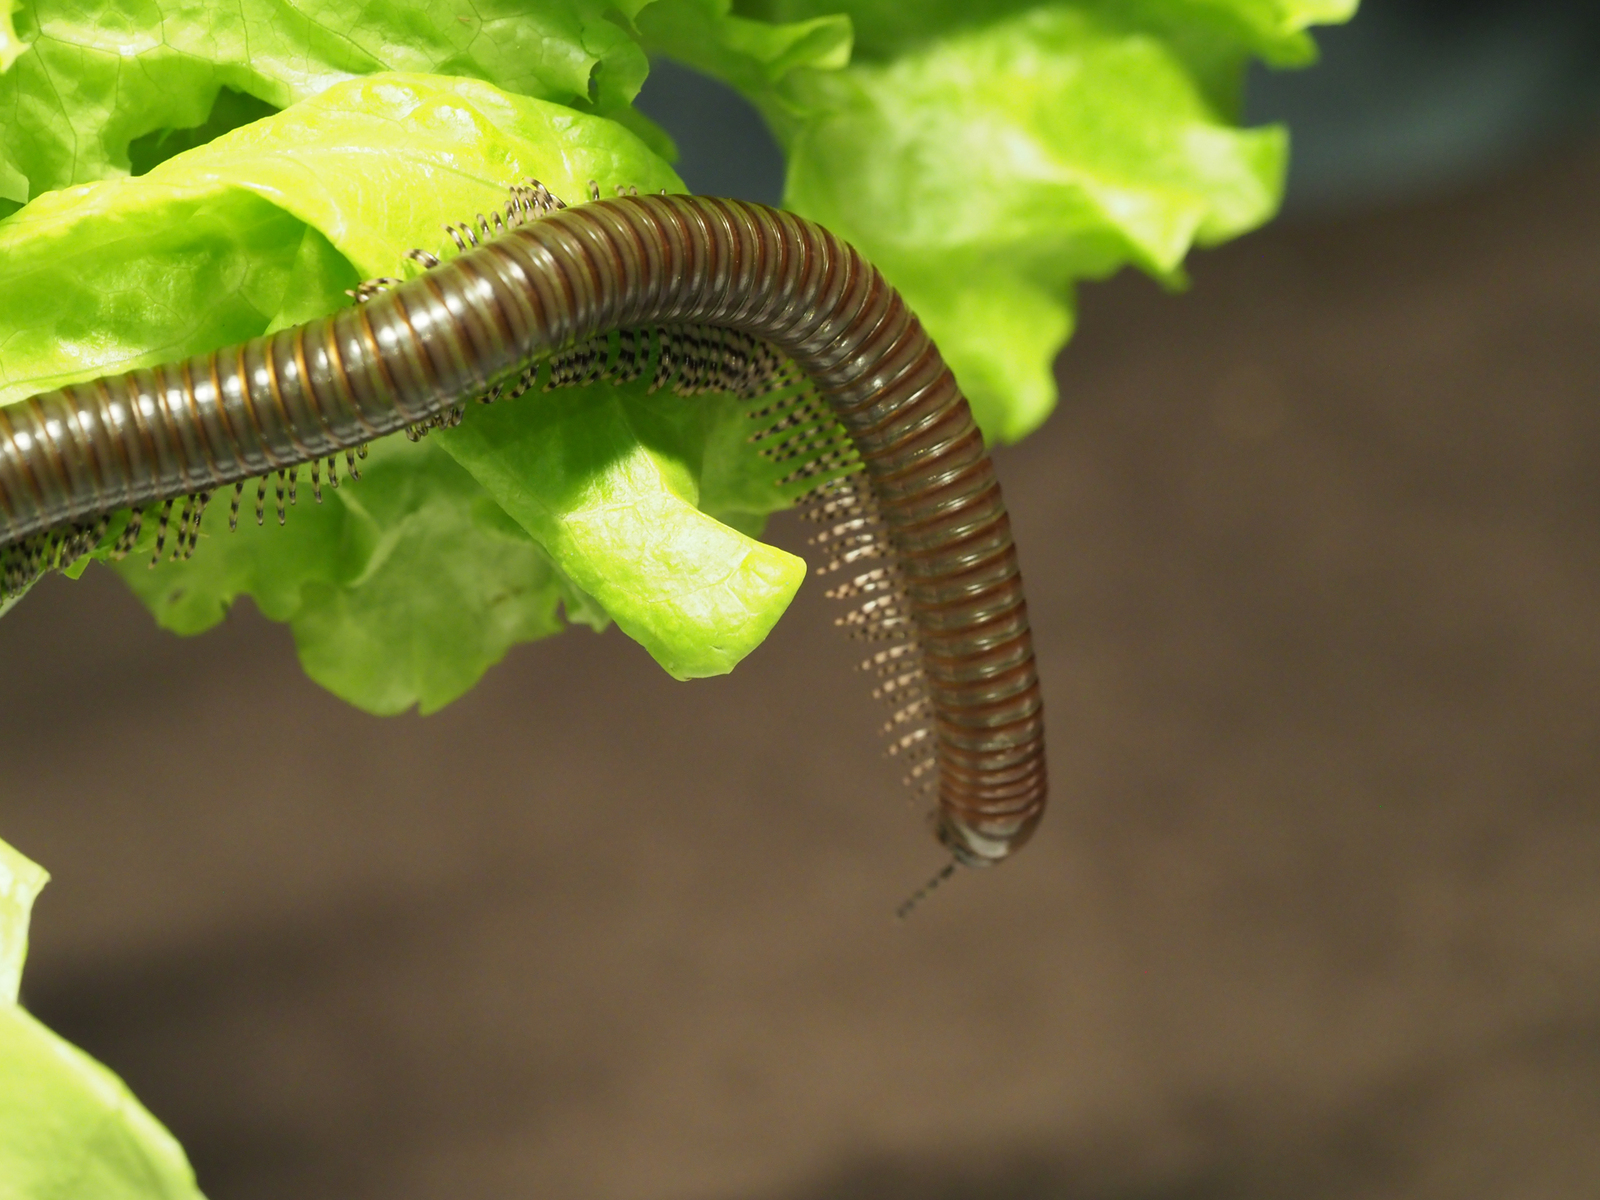 Giant black African centipede - My, Centipede, Insects, Biology, Nature, Longpost